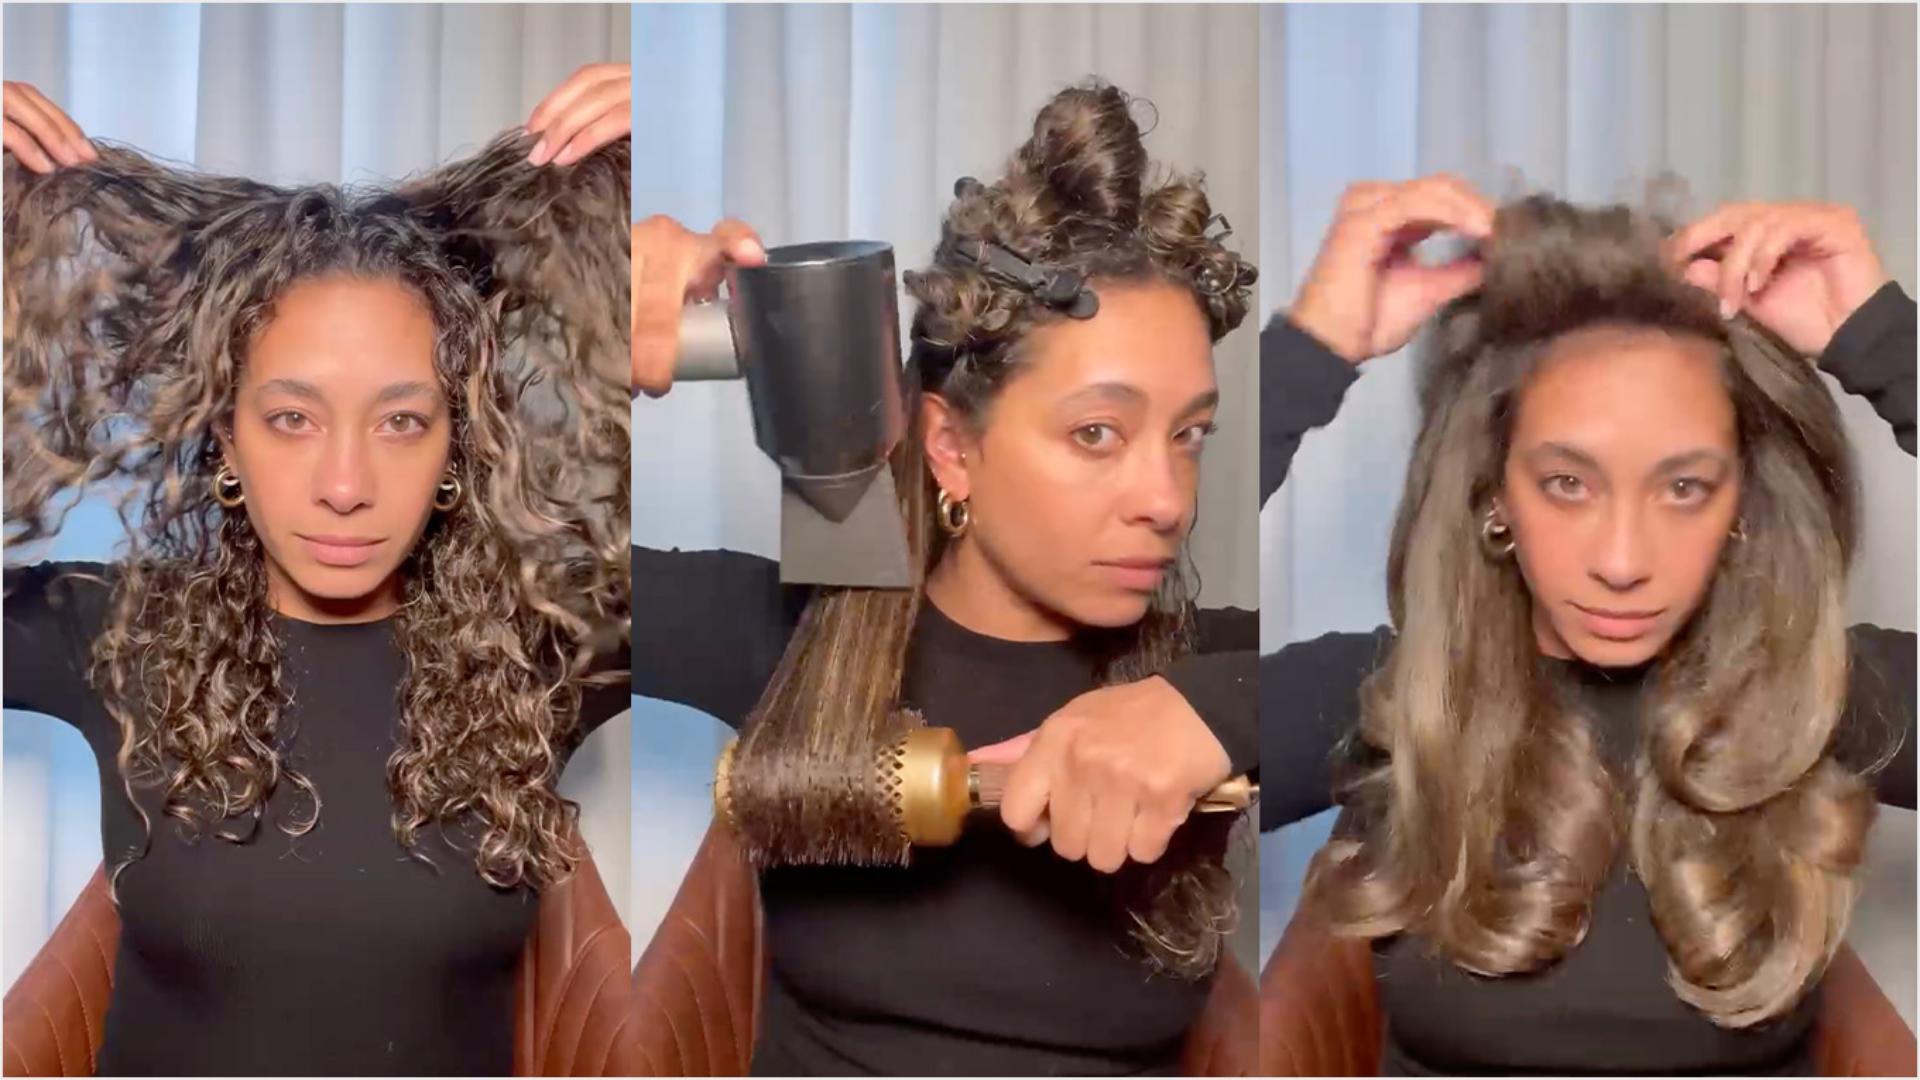 Leading stylist Irinel, styles her blowout to camera with tips how to use Dyson technology